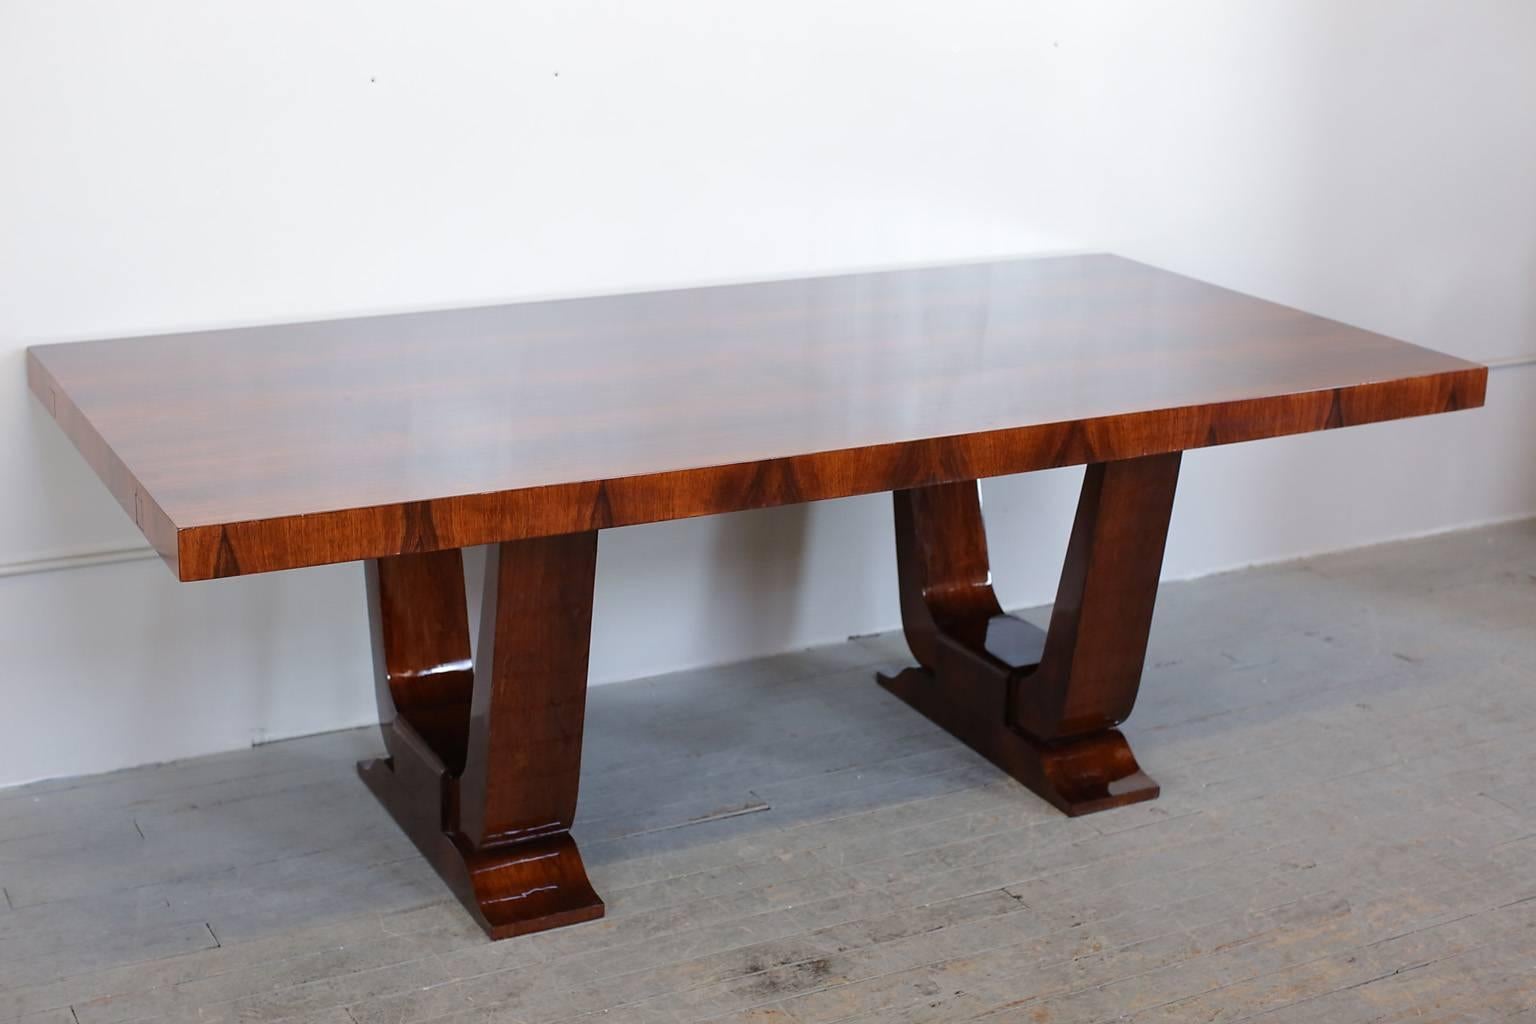 French Art Deco Walnut Dining Table, circa 1940s In Excellent Condition For Sale In New York, NY